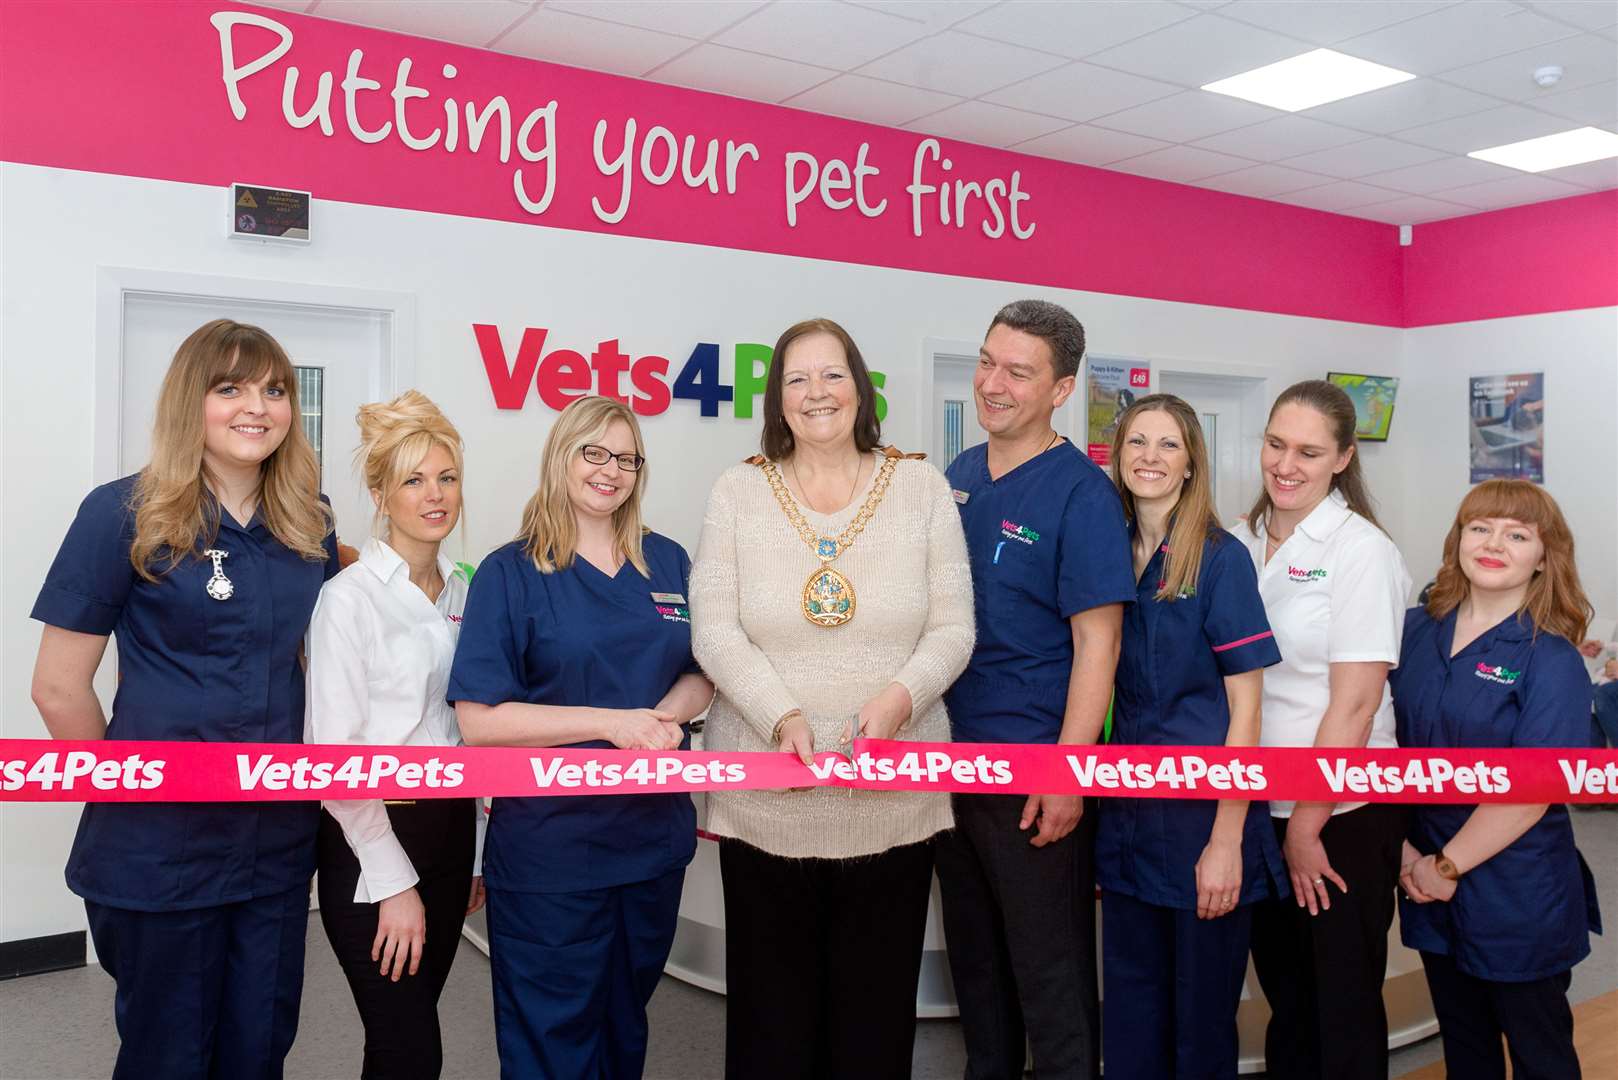 Former Mayor of Swale, Cllr Lesley Ingham, opening the Vets4Pets branch in Sittingbourne in 2017